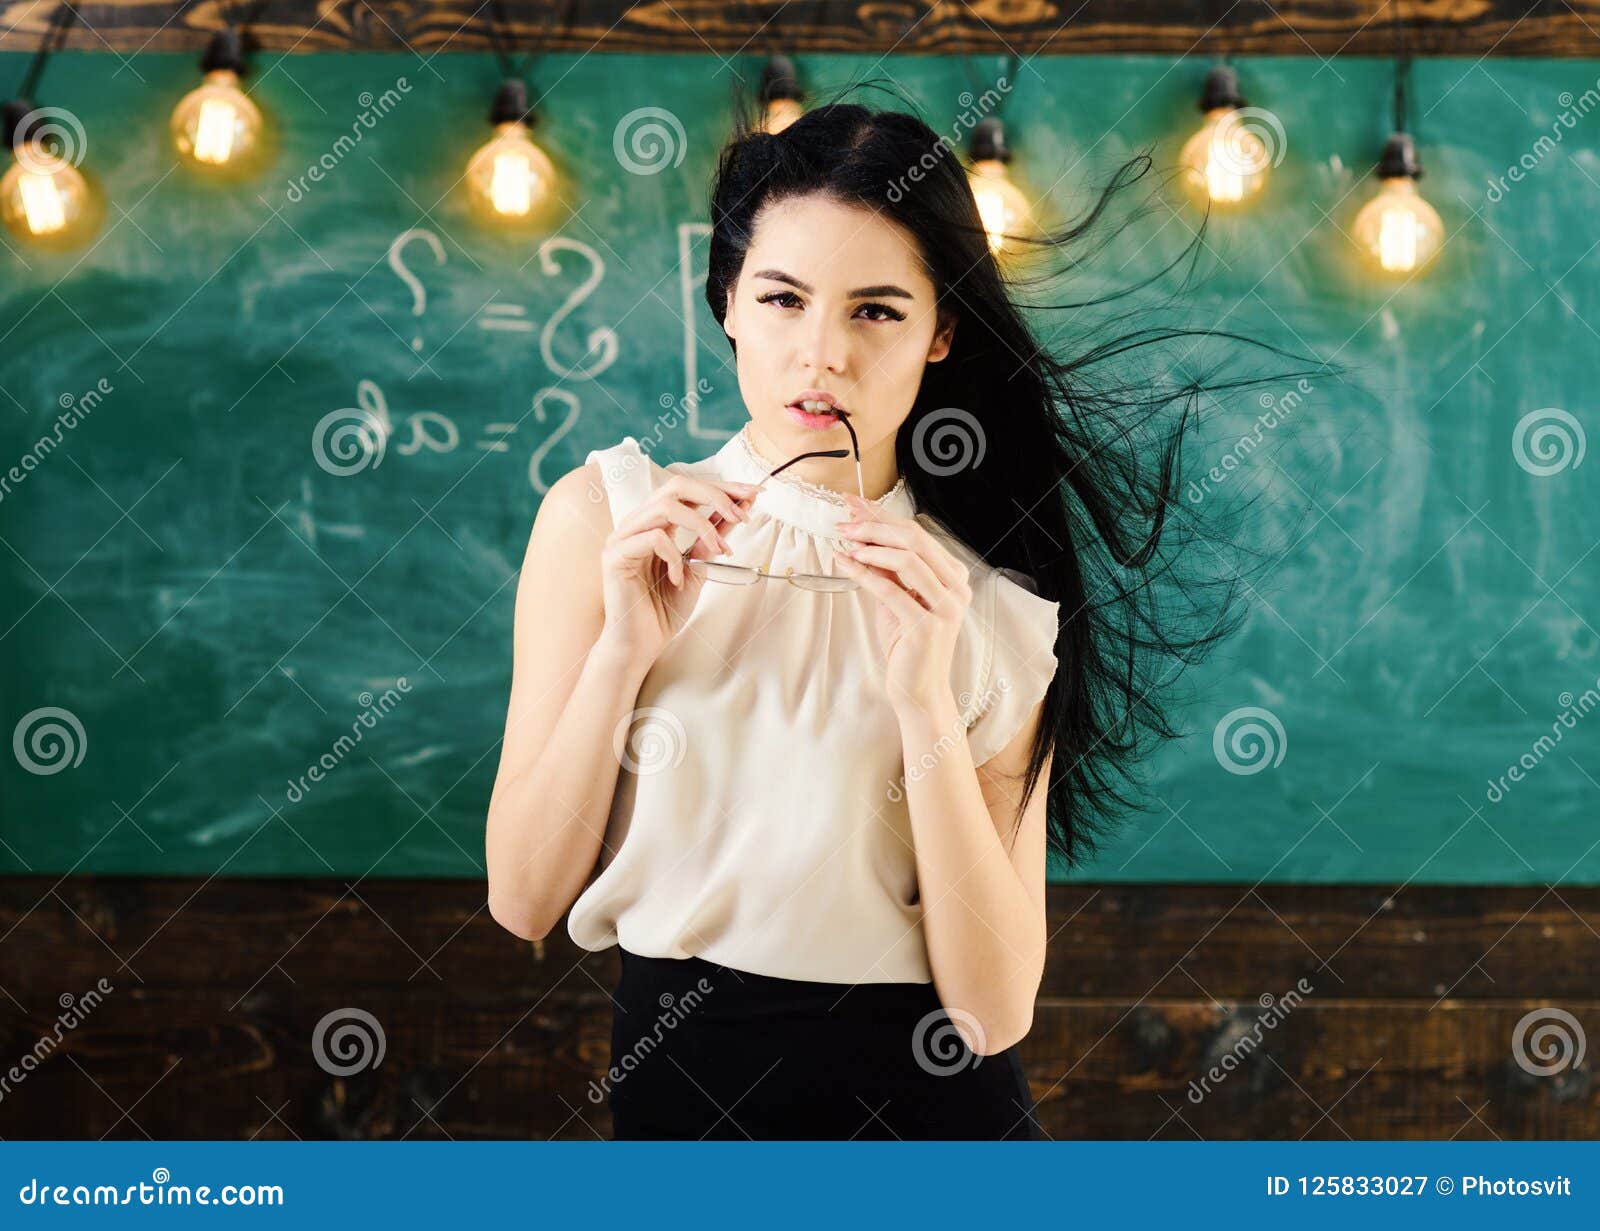 Schools Sexcyvideo - Teacher with Glasses and Waving Hair Looks Sexy. Woman with Long Hair in  White Blouse Stands in Classroom Stock Image - Image of blouse, adult:  125833027